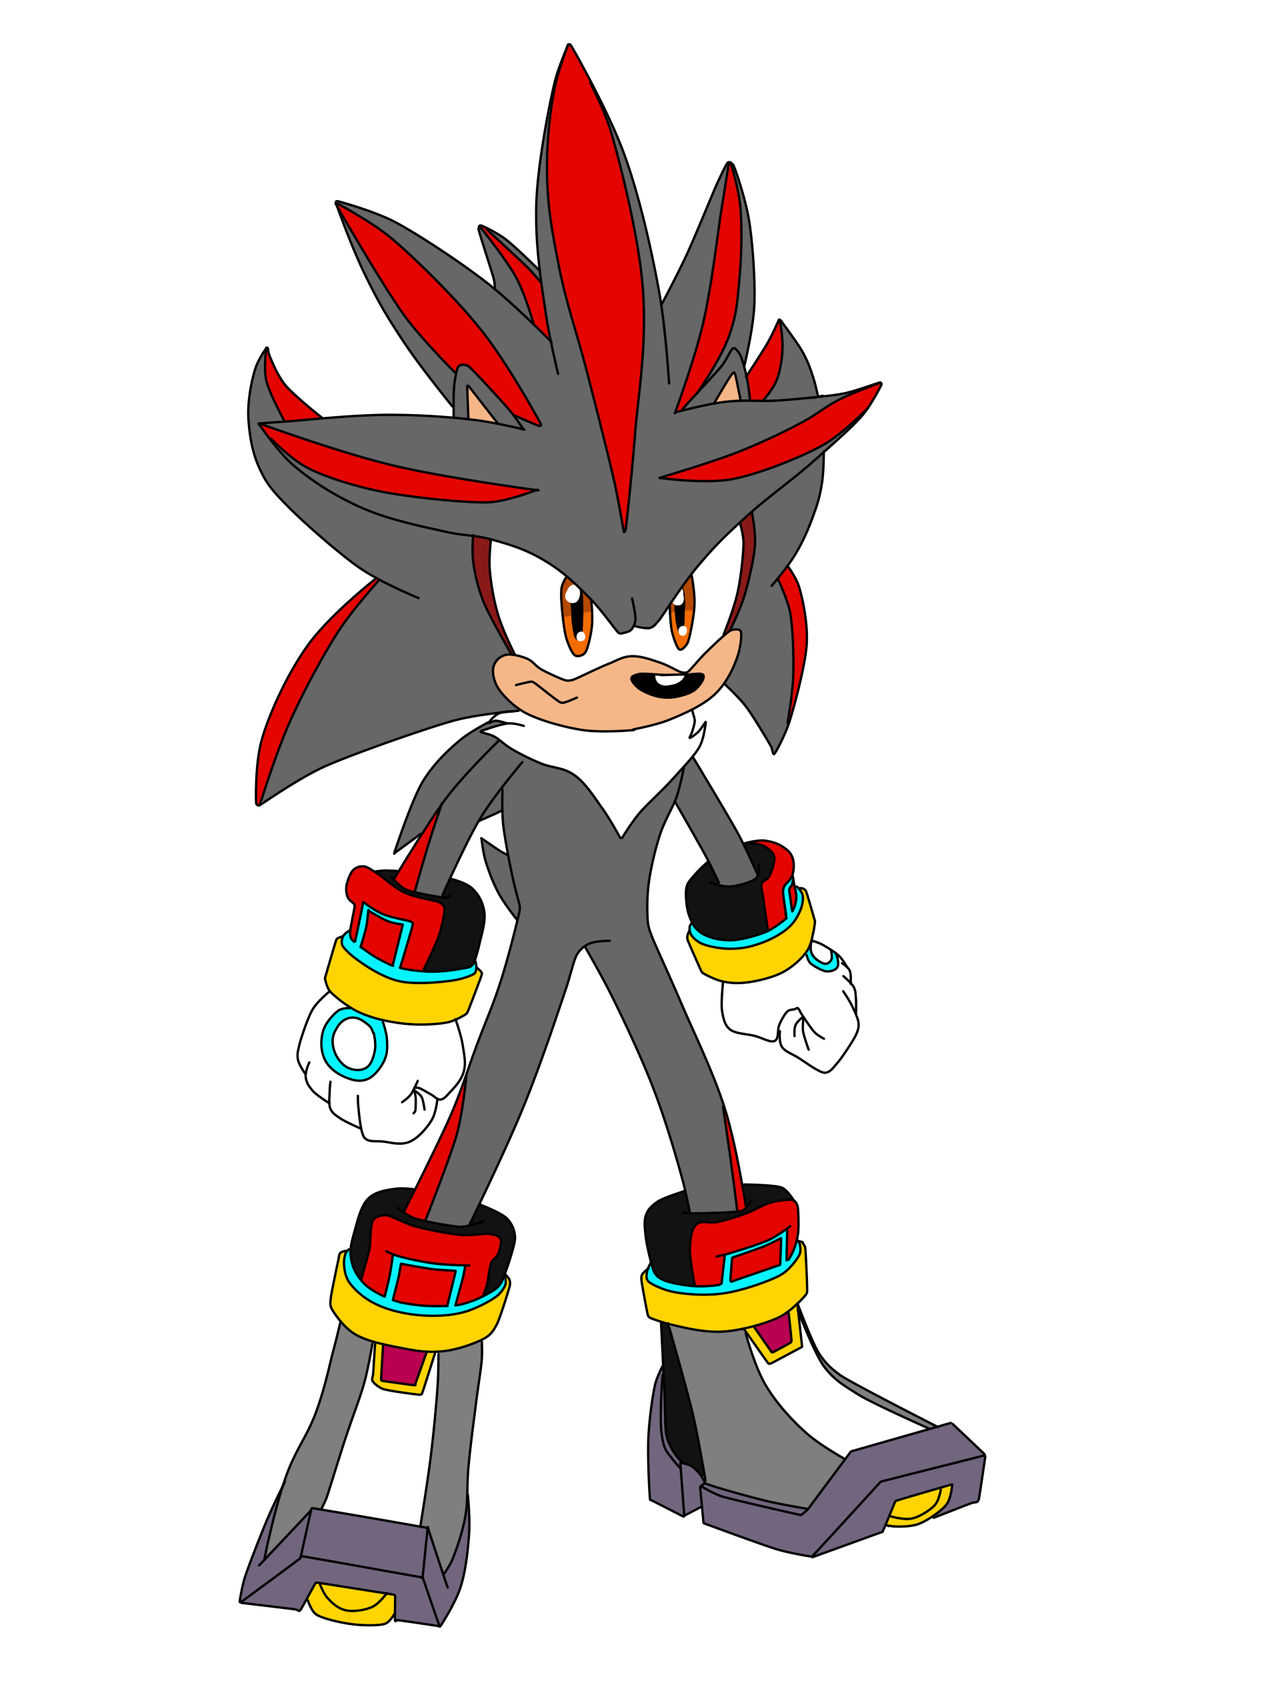 Hyper Shilver (Fusion with Shadow and Silver) by ByGhostEduard on DeviantArt